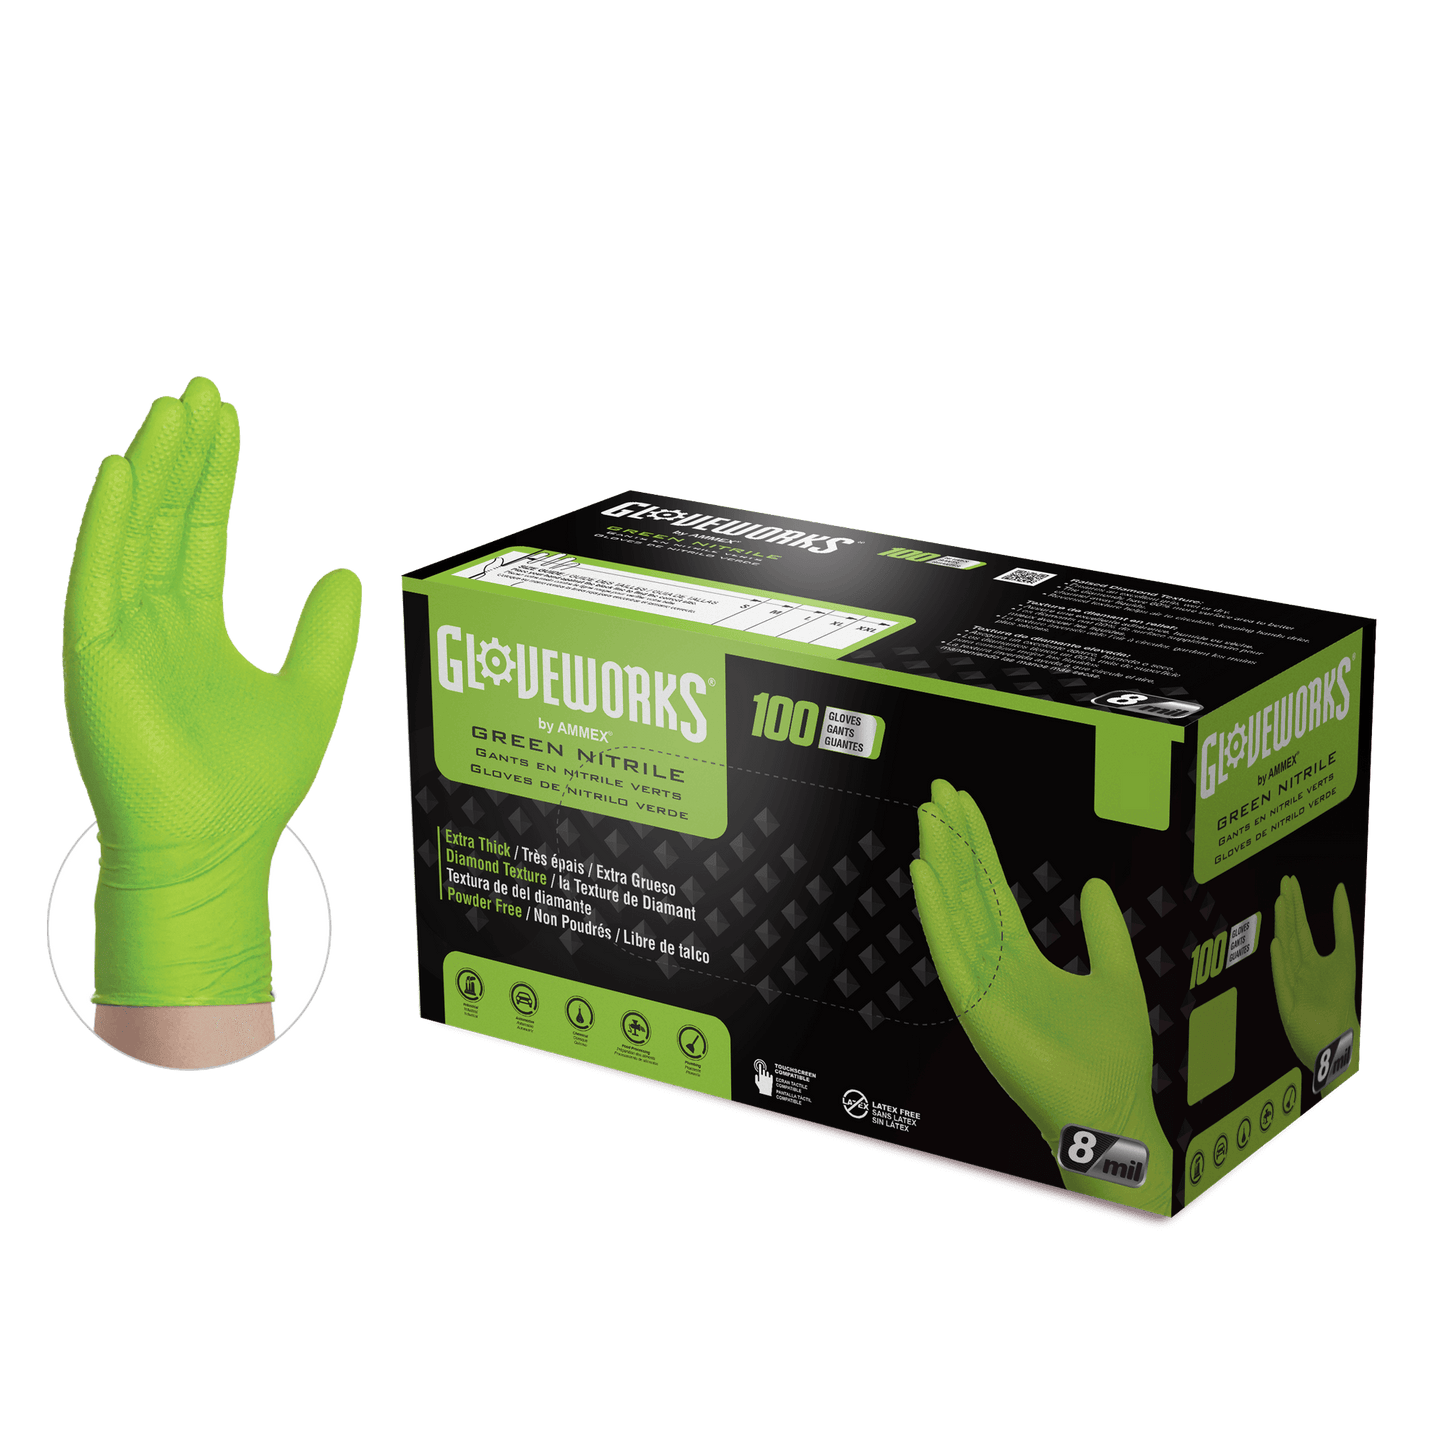 AMMEX Gloveworks HD Green Nitrile Powder Free Industrial 8MIL Disposable Gloves Case of 1000